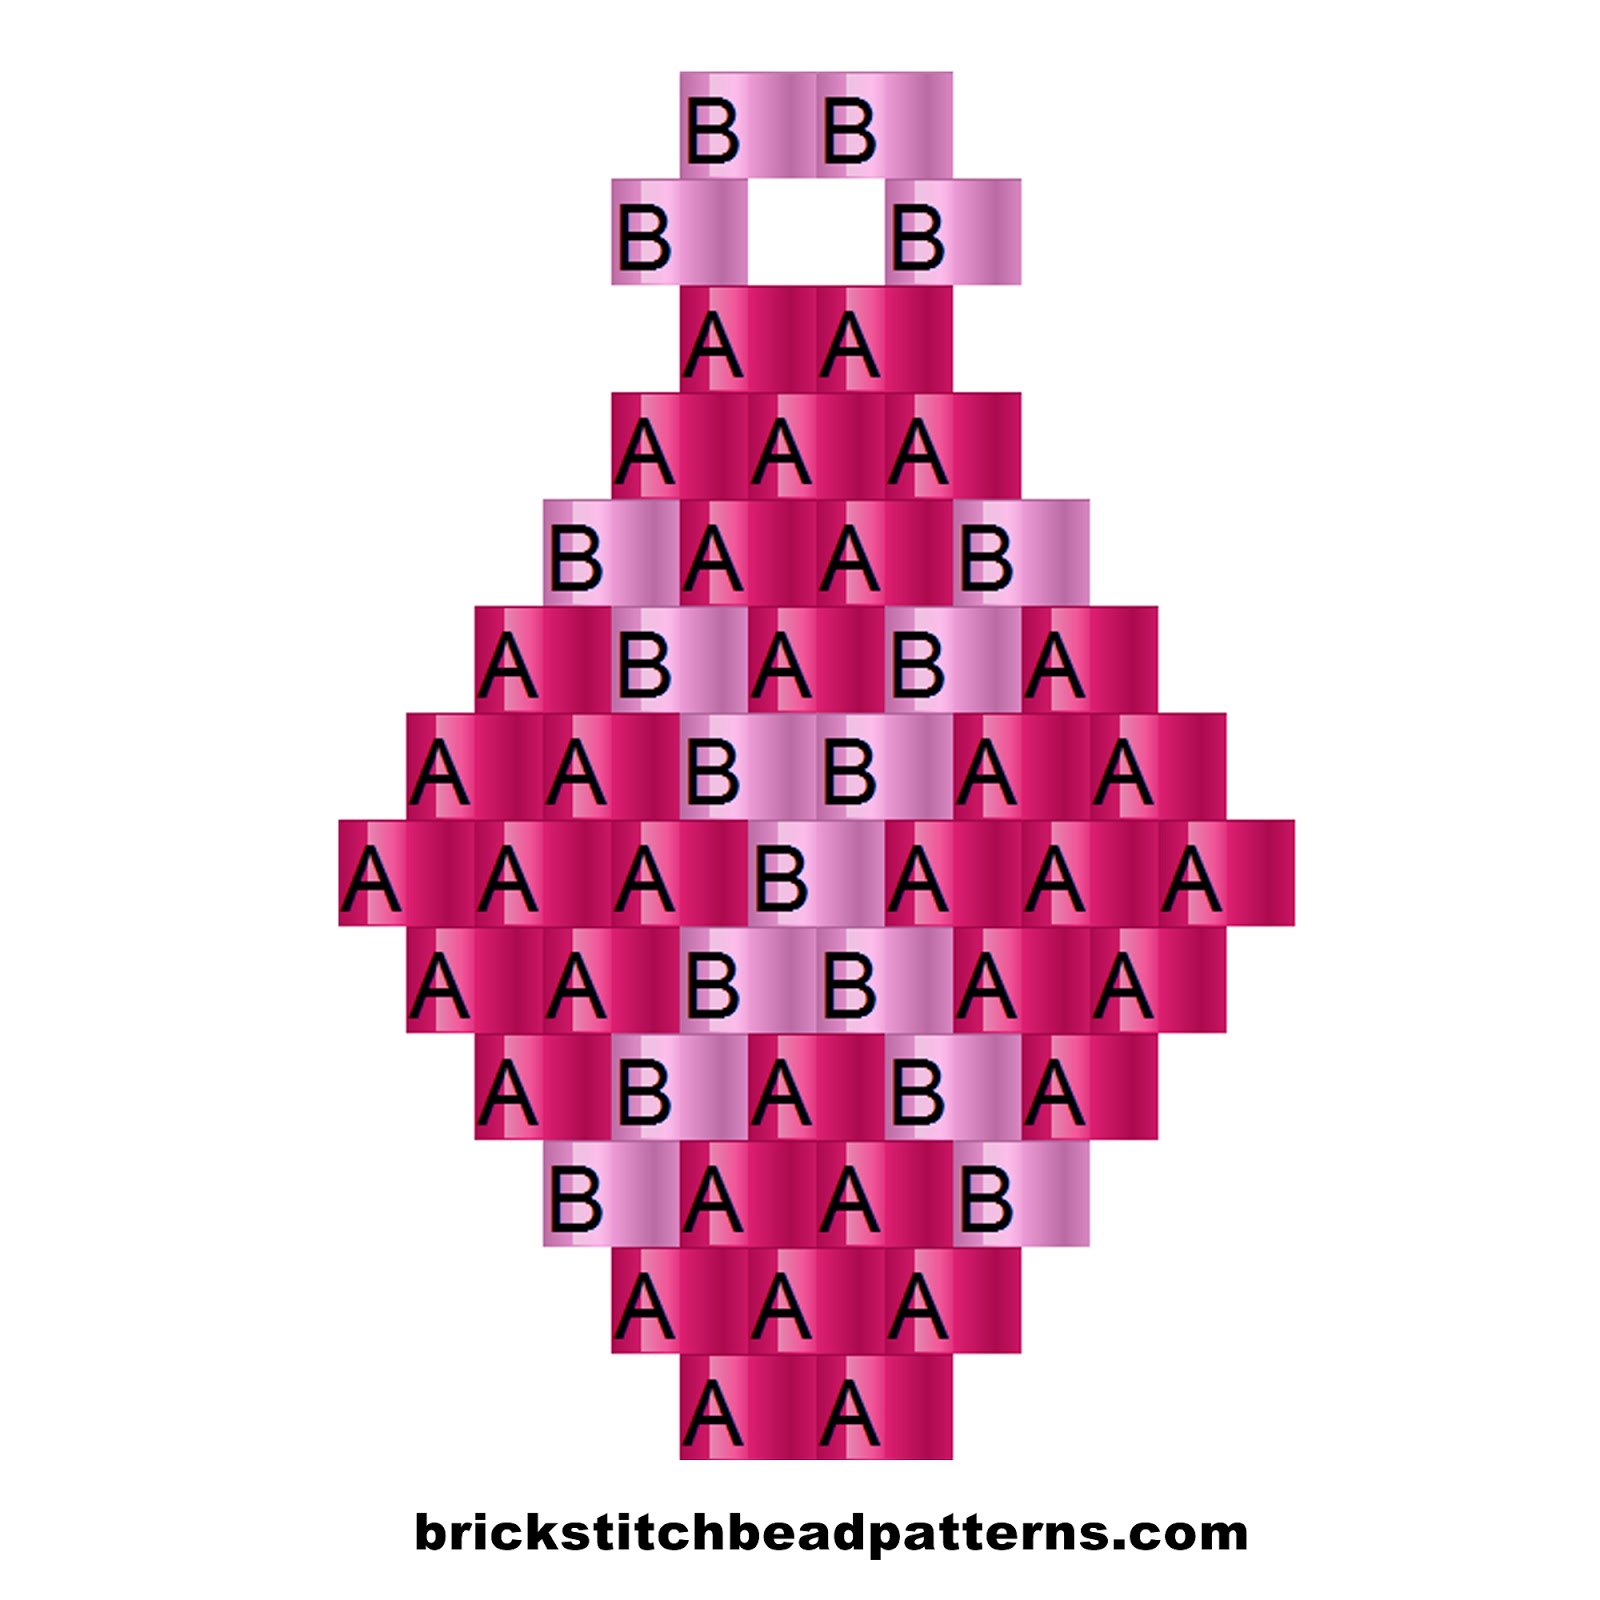 Download Brick Stitch Bead Patterns Journal: Free Quick and Easy Beginner Diamond Beaded Earring Pattern 21